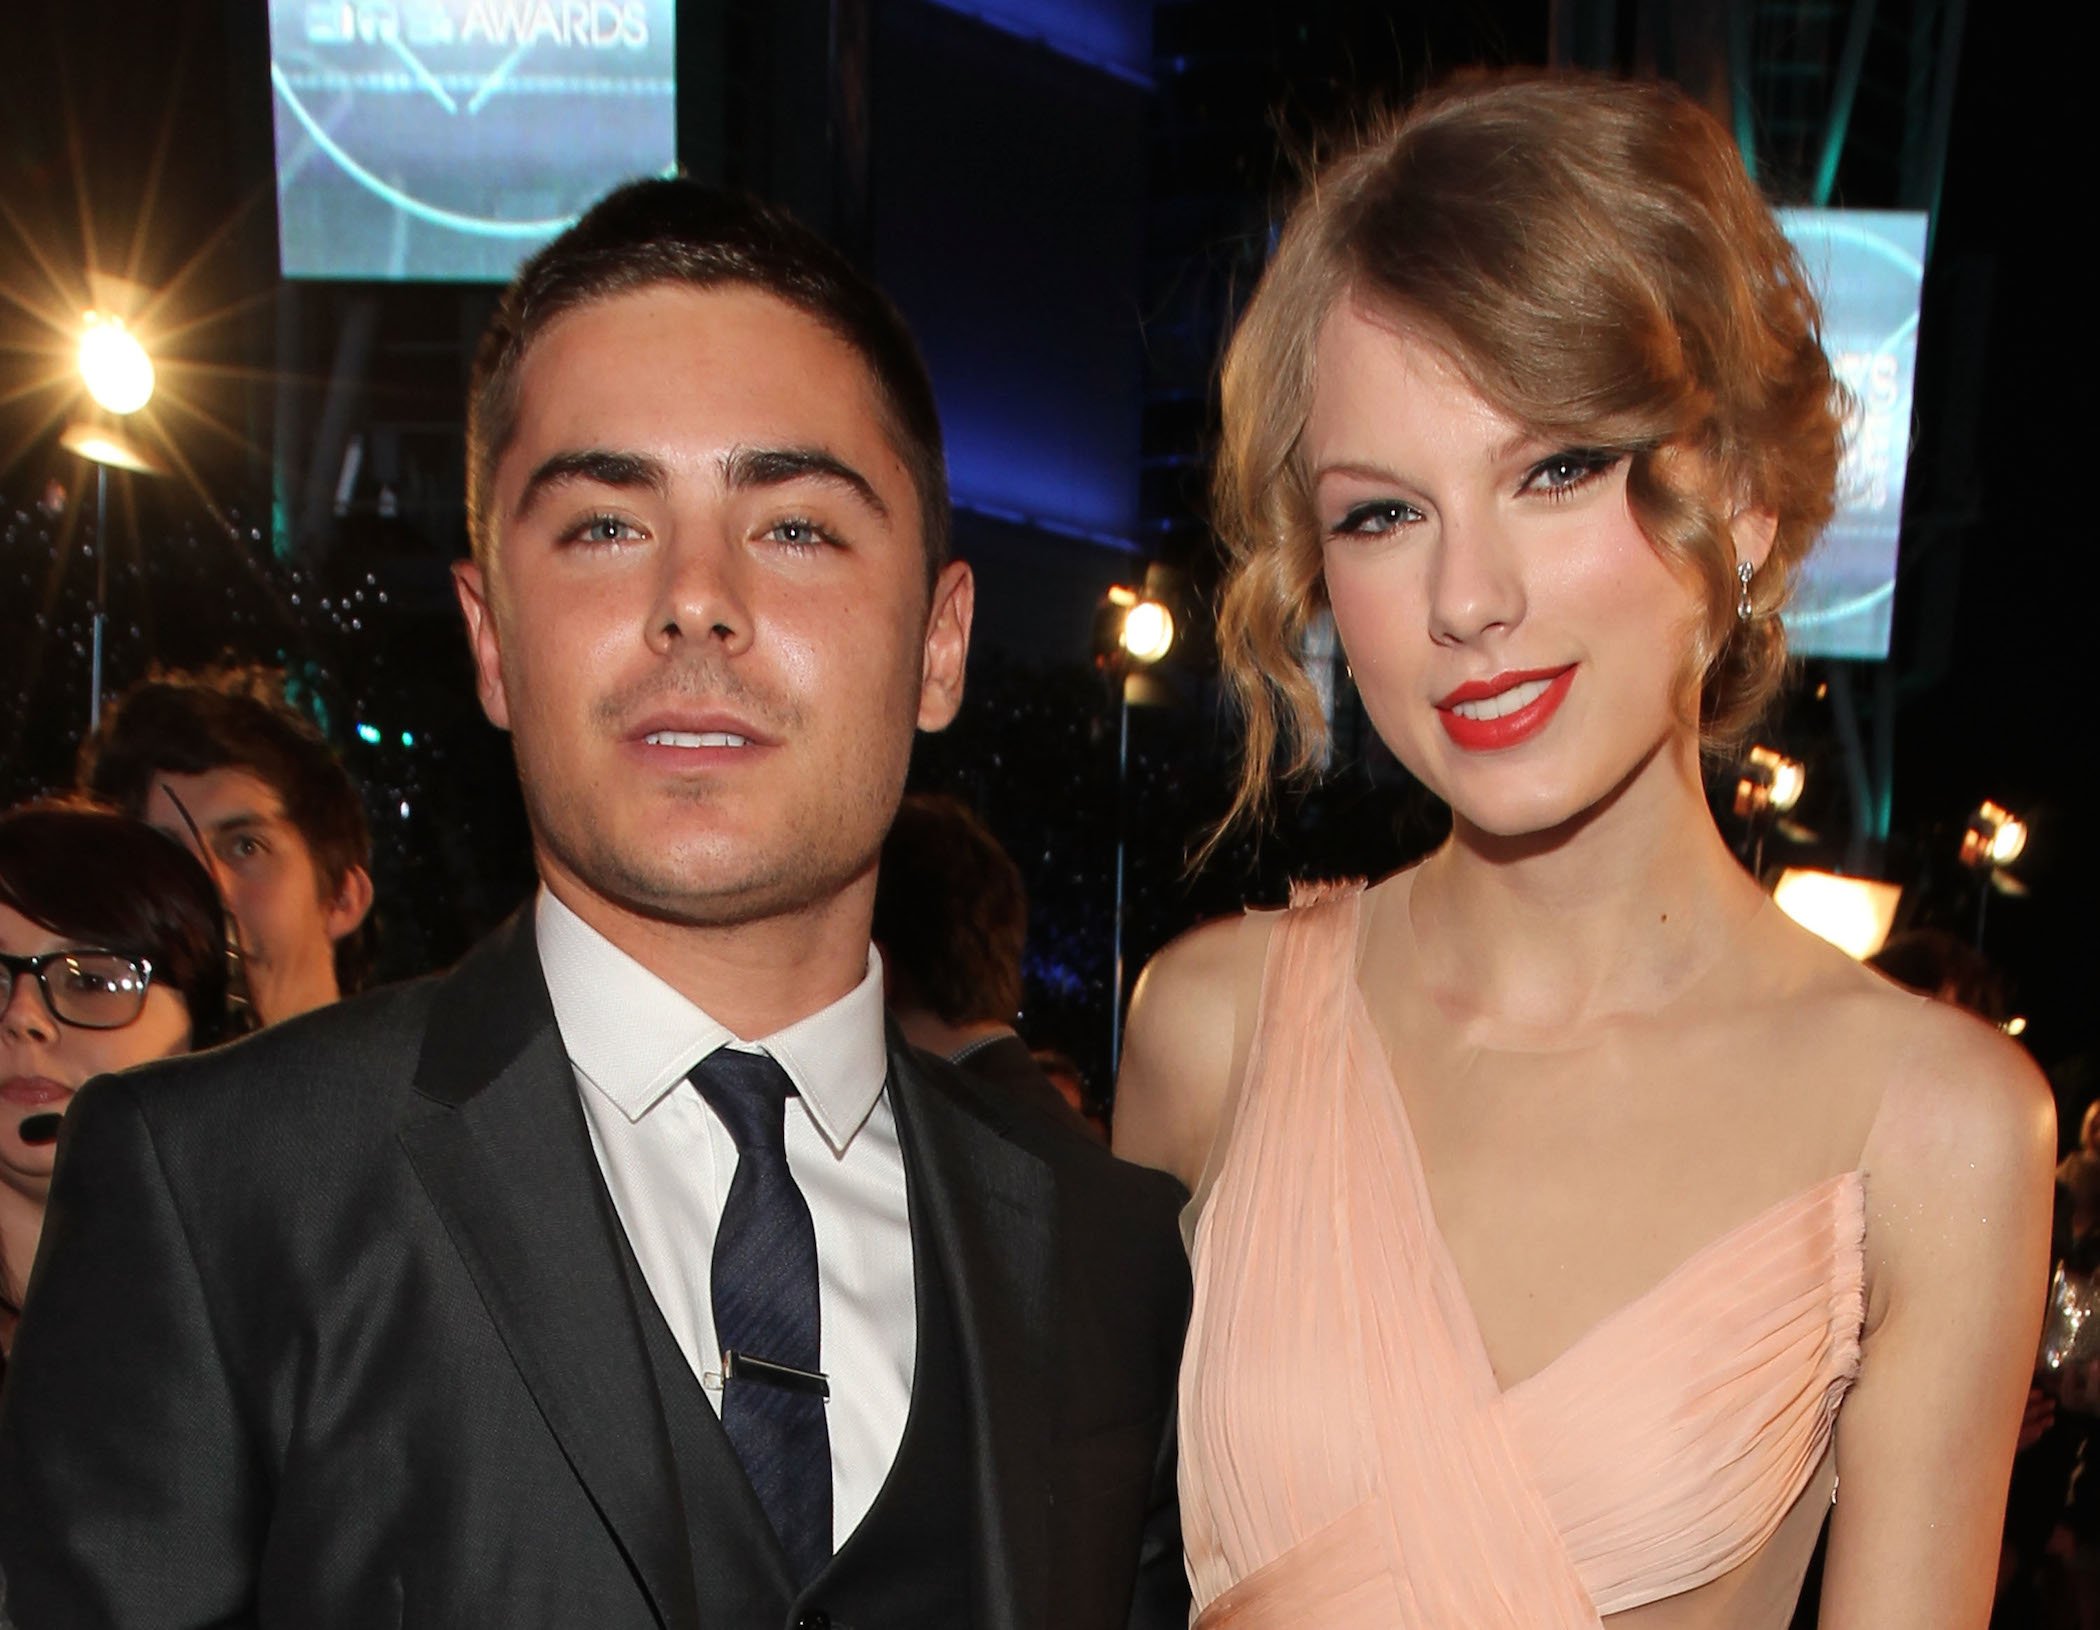 Zac Efron and Taylor Swift arrive at the 2011 People's Choice Awards 